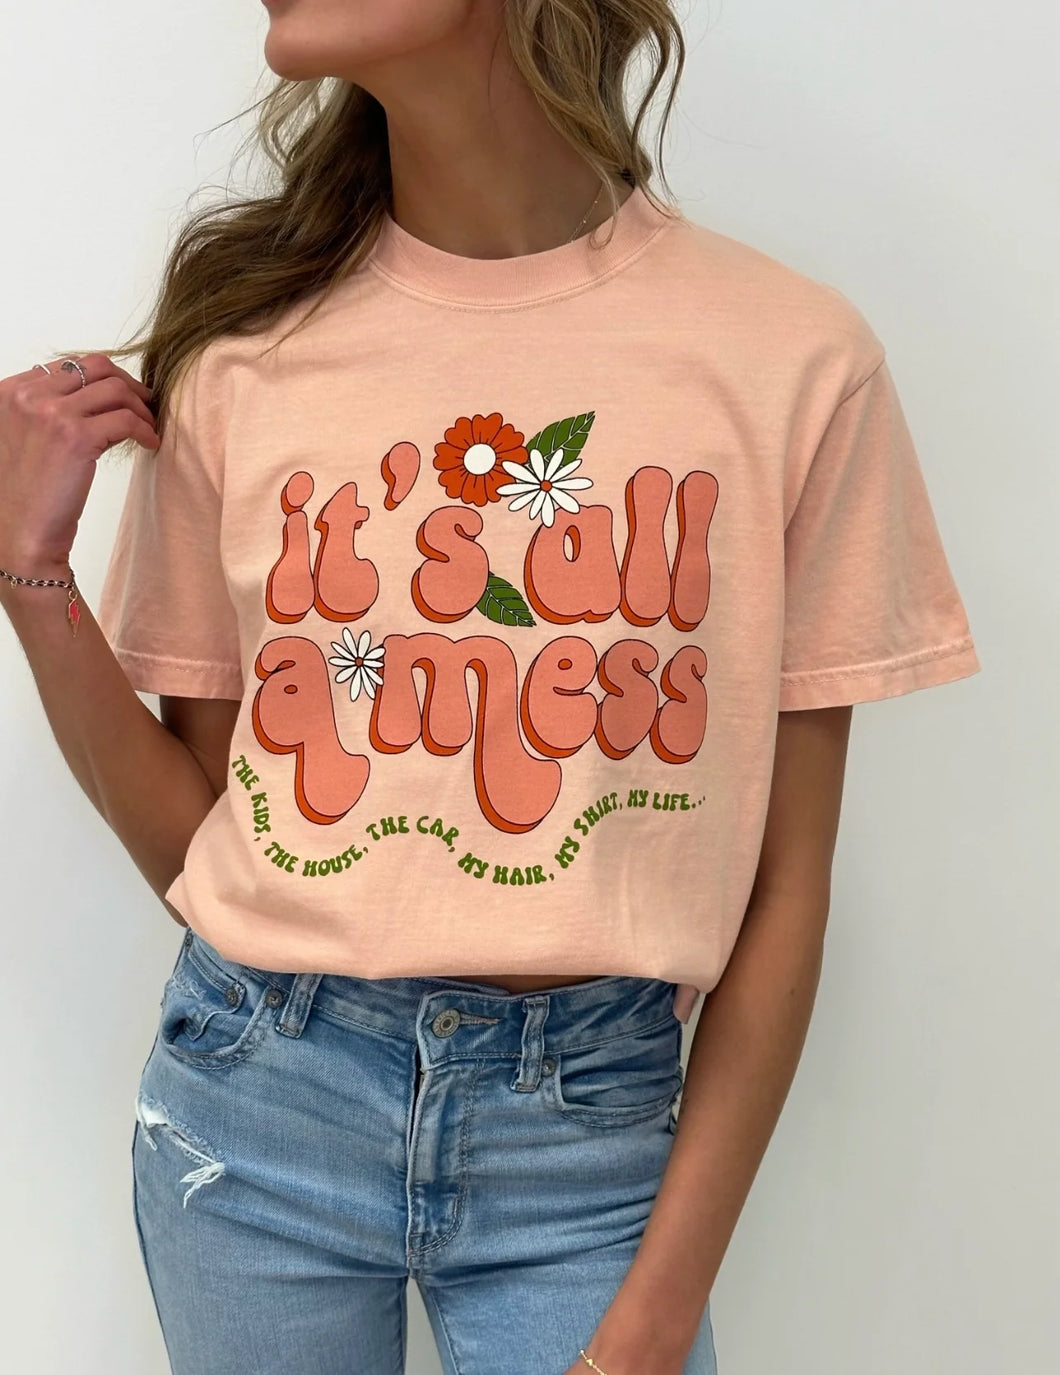 It’s All A Mess Tee